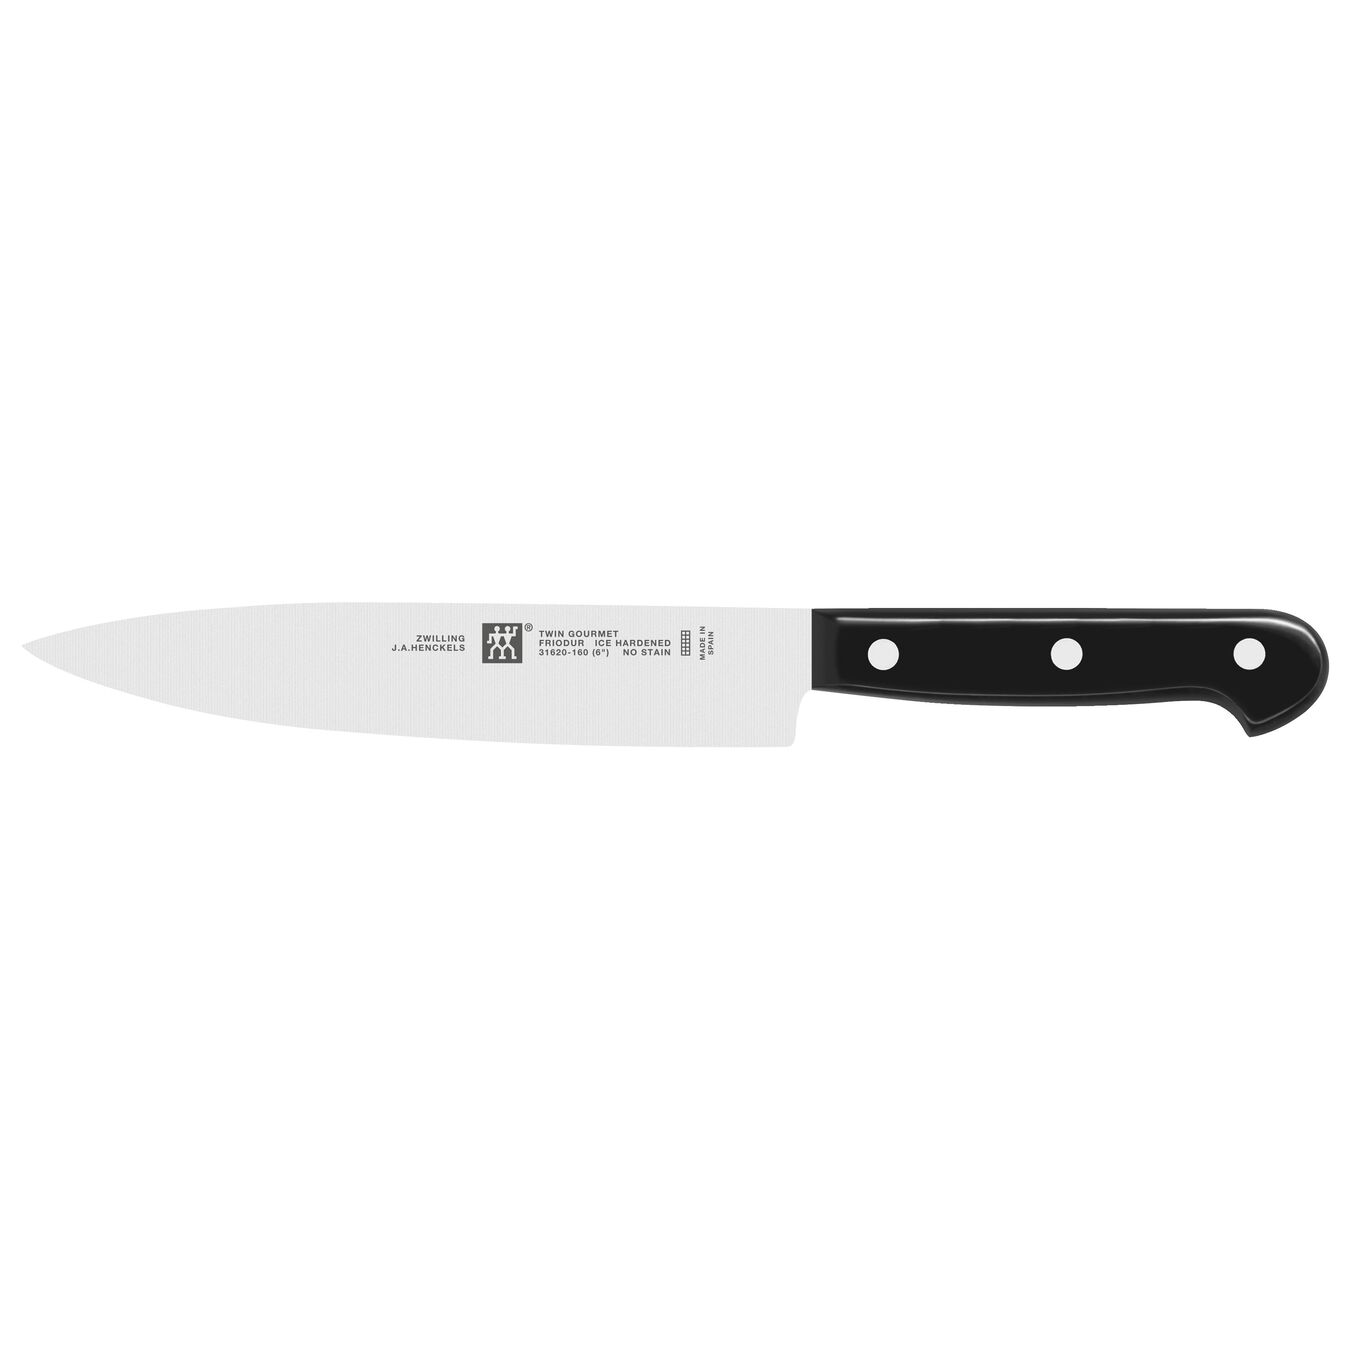 6.5 inch Carving knife - Visual Imperfections,,large 2